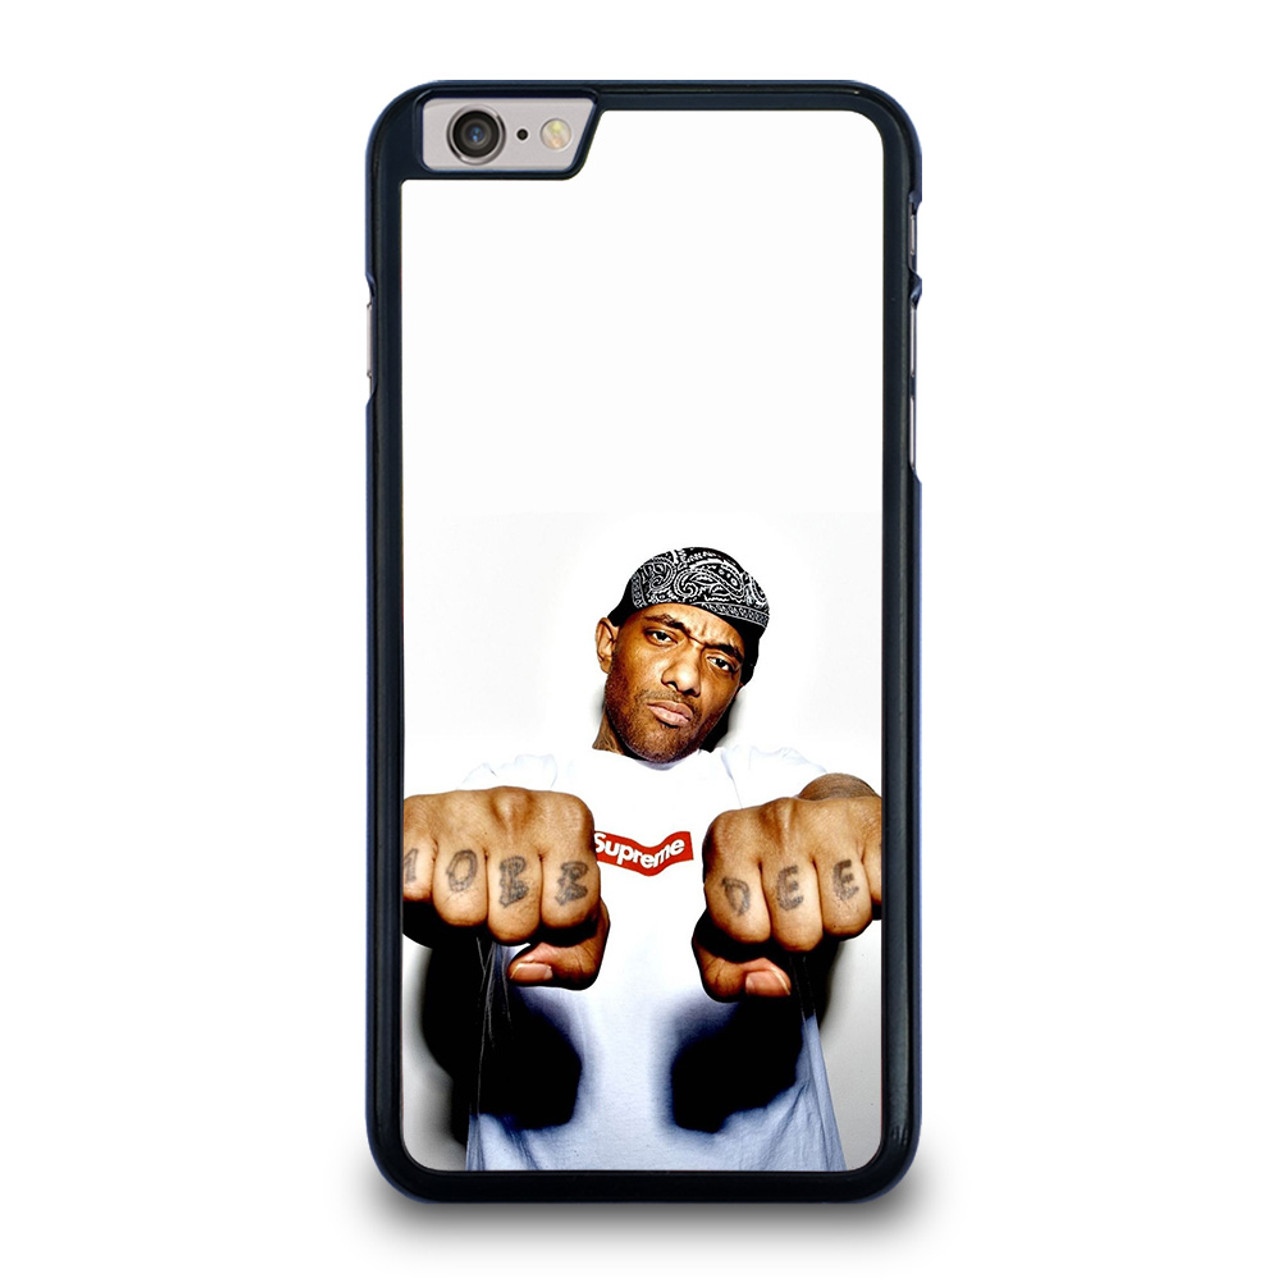 MOBB DEEP PRODIGY SUPREME iPhone 6 / 6S Plus Case Cover